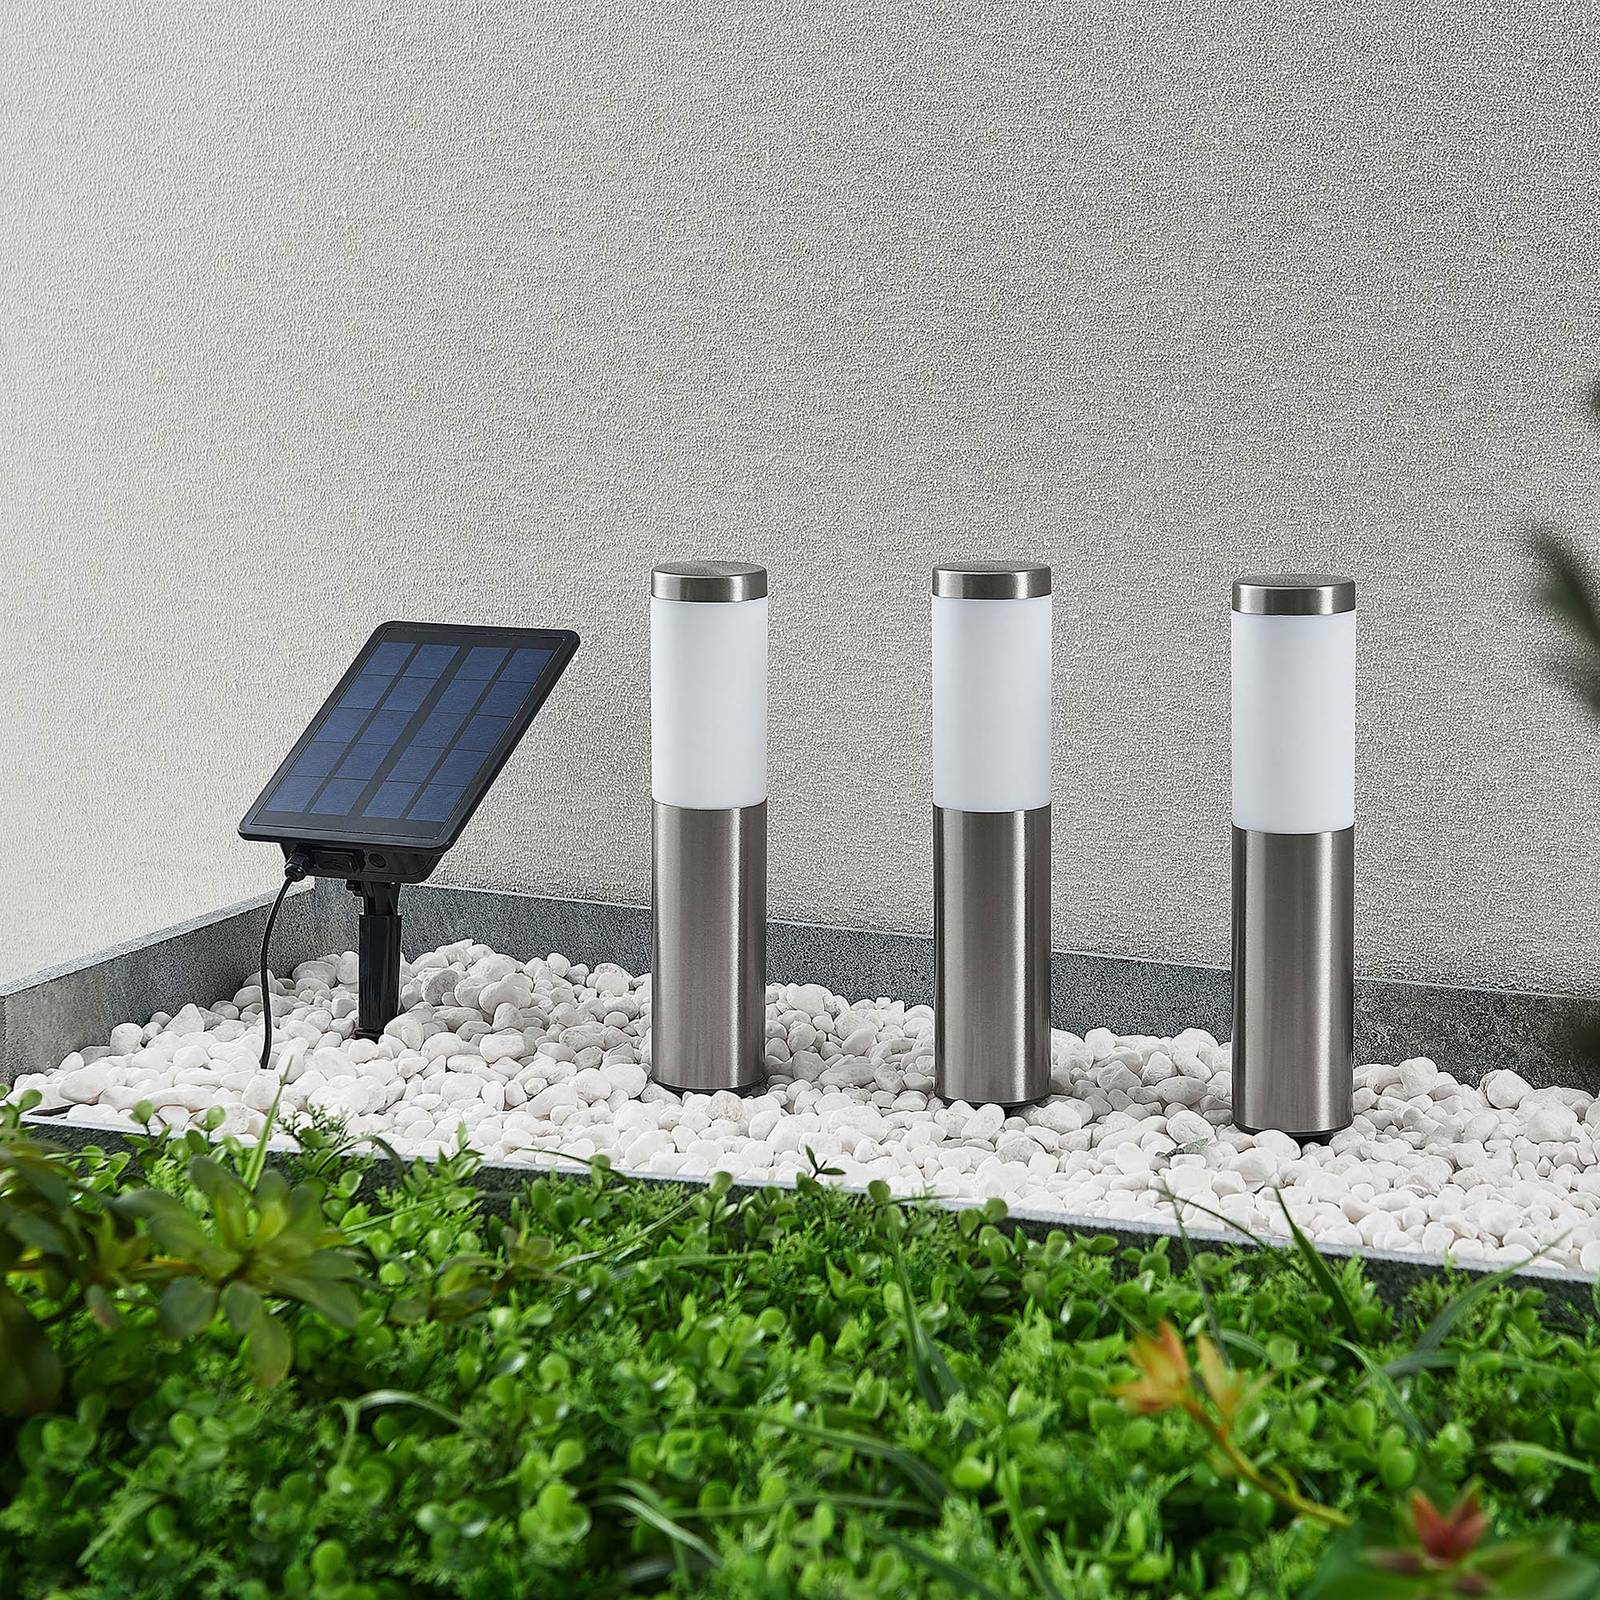 Image of Lindby Lexiane lampes solaires LED, lot de 3, inox 4251911713305